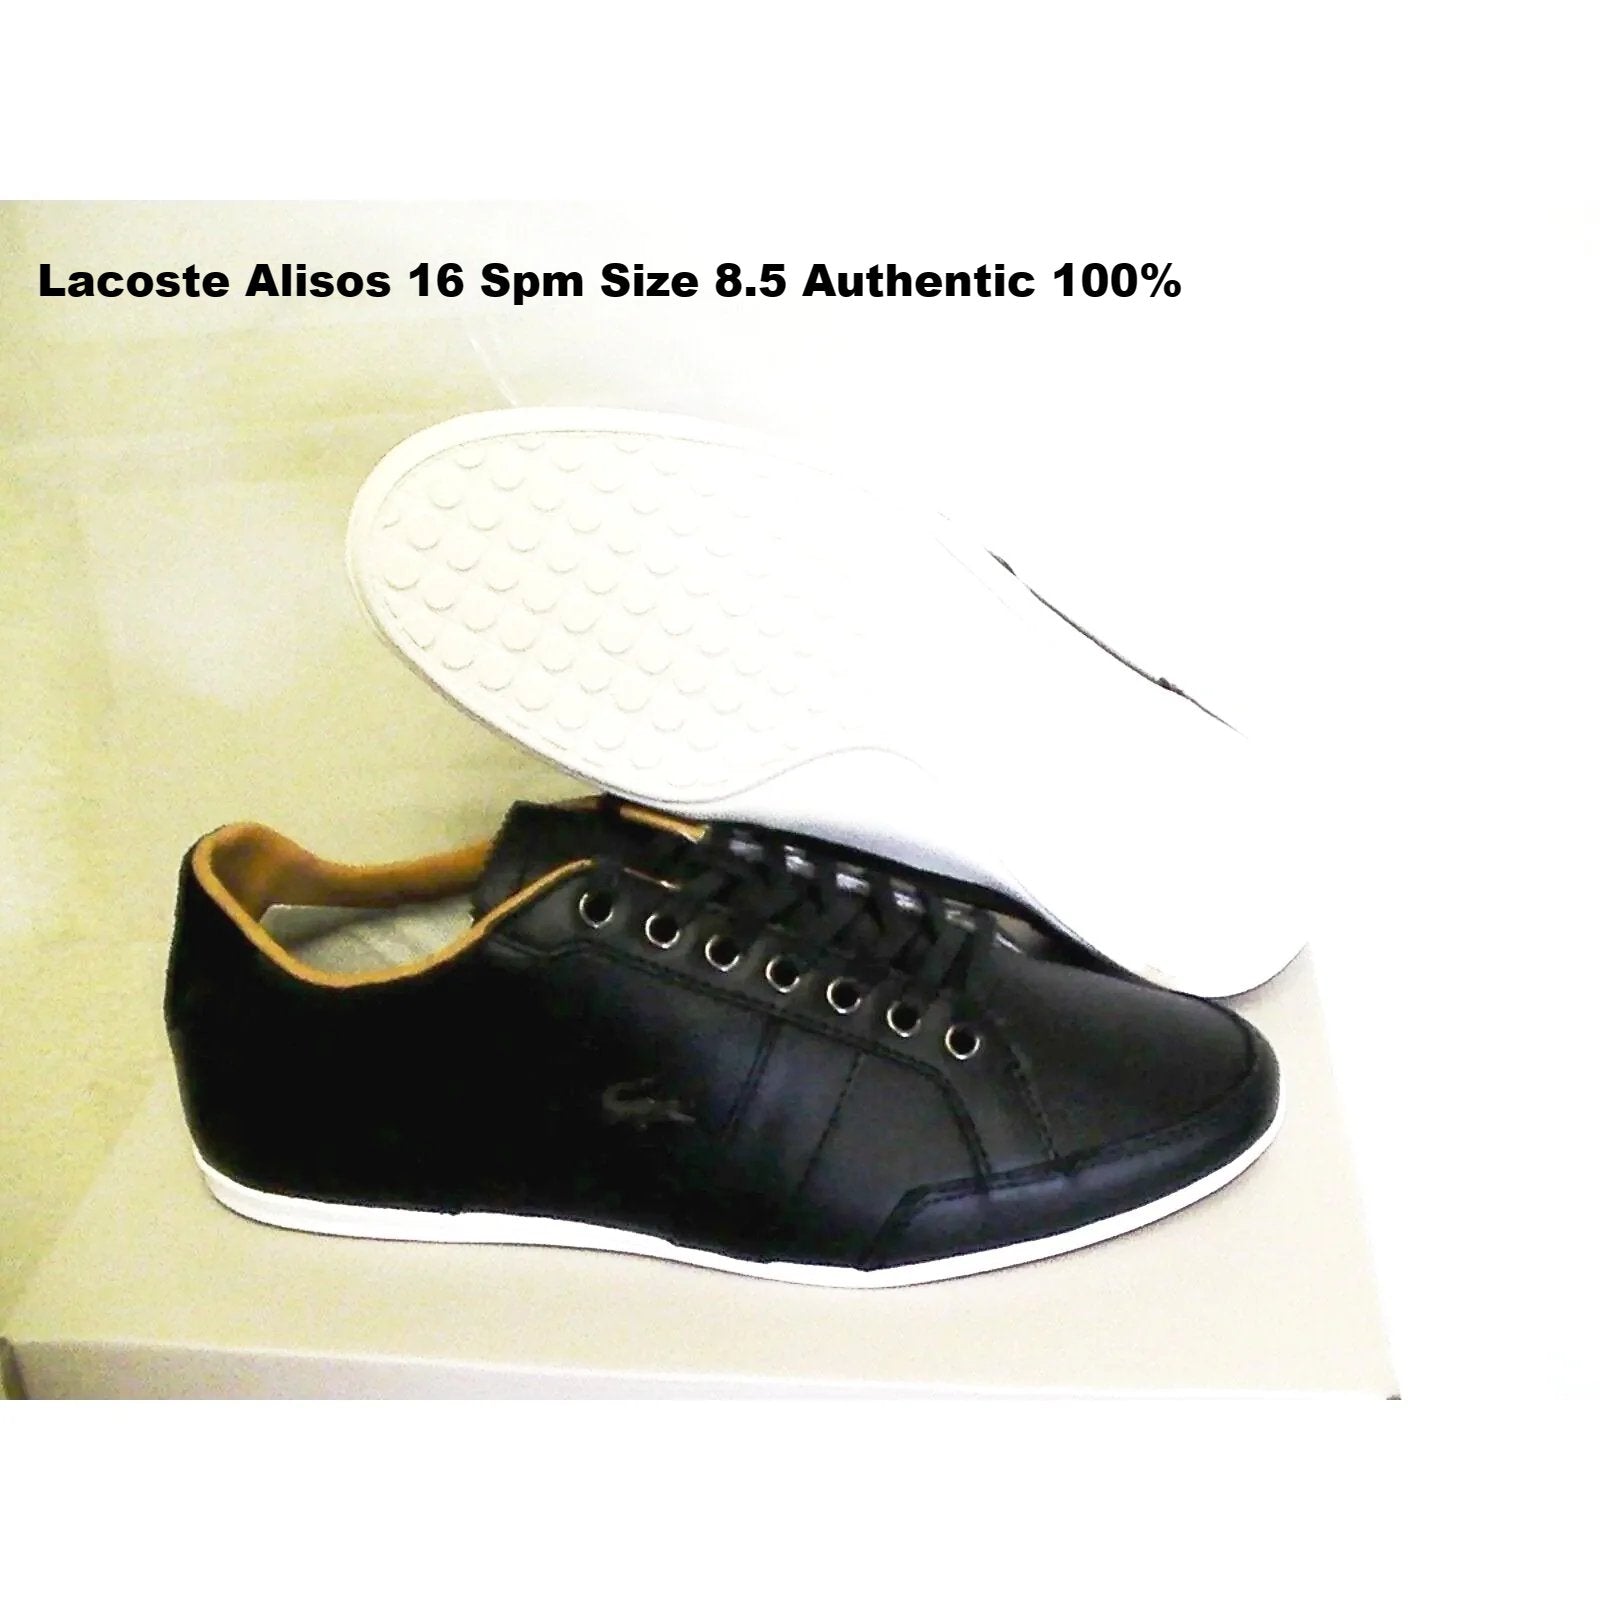 Lacoste casual shoes alisos 16 spm leather size 8.5 us – Classic ...